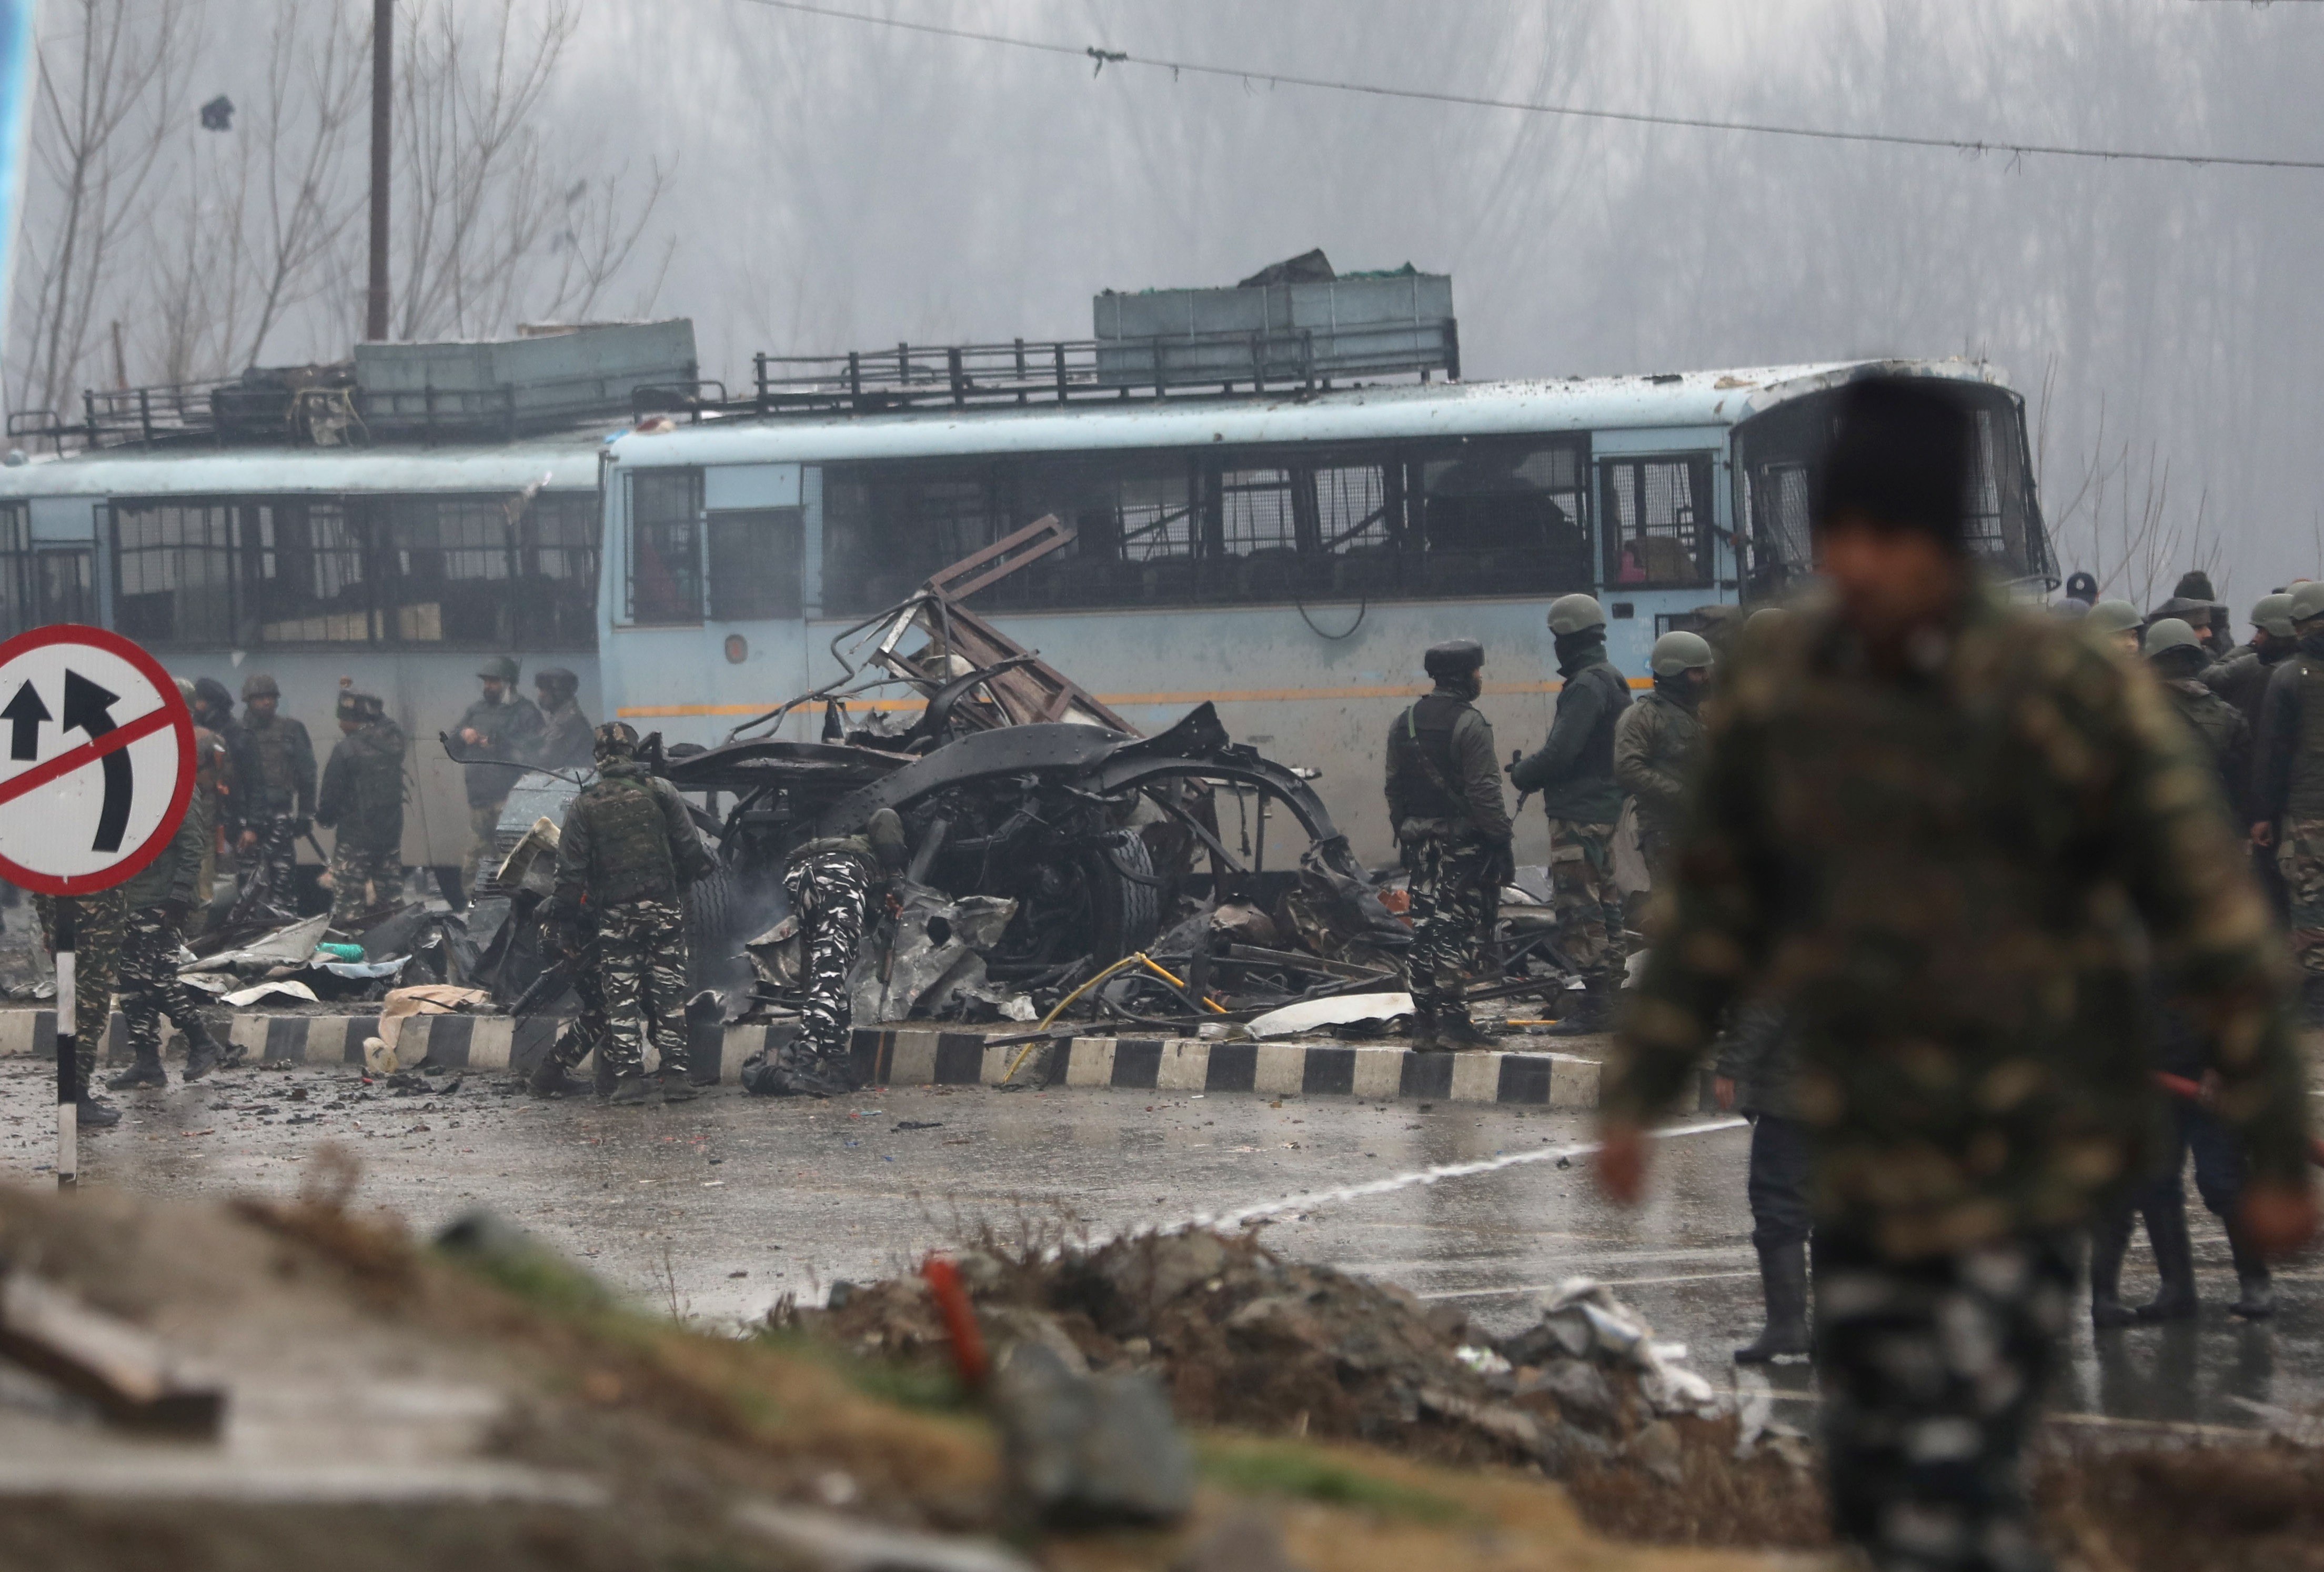 Indian security officers inspect the site of the blast in Jammu and Kashmir’s Pulwama district on Thursday. Photo: EPA-EFE